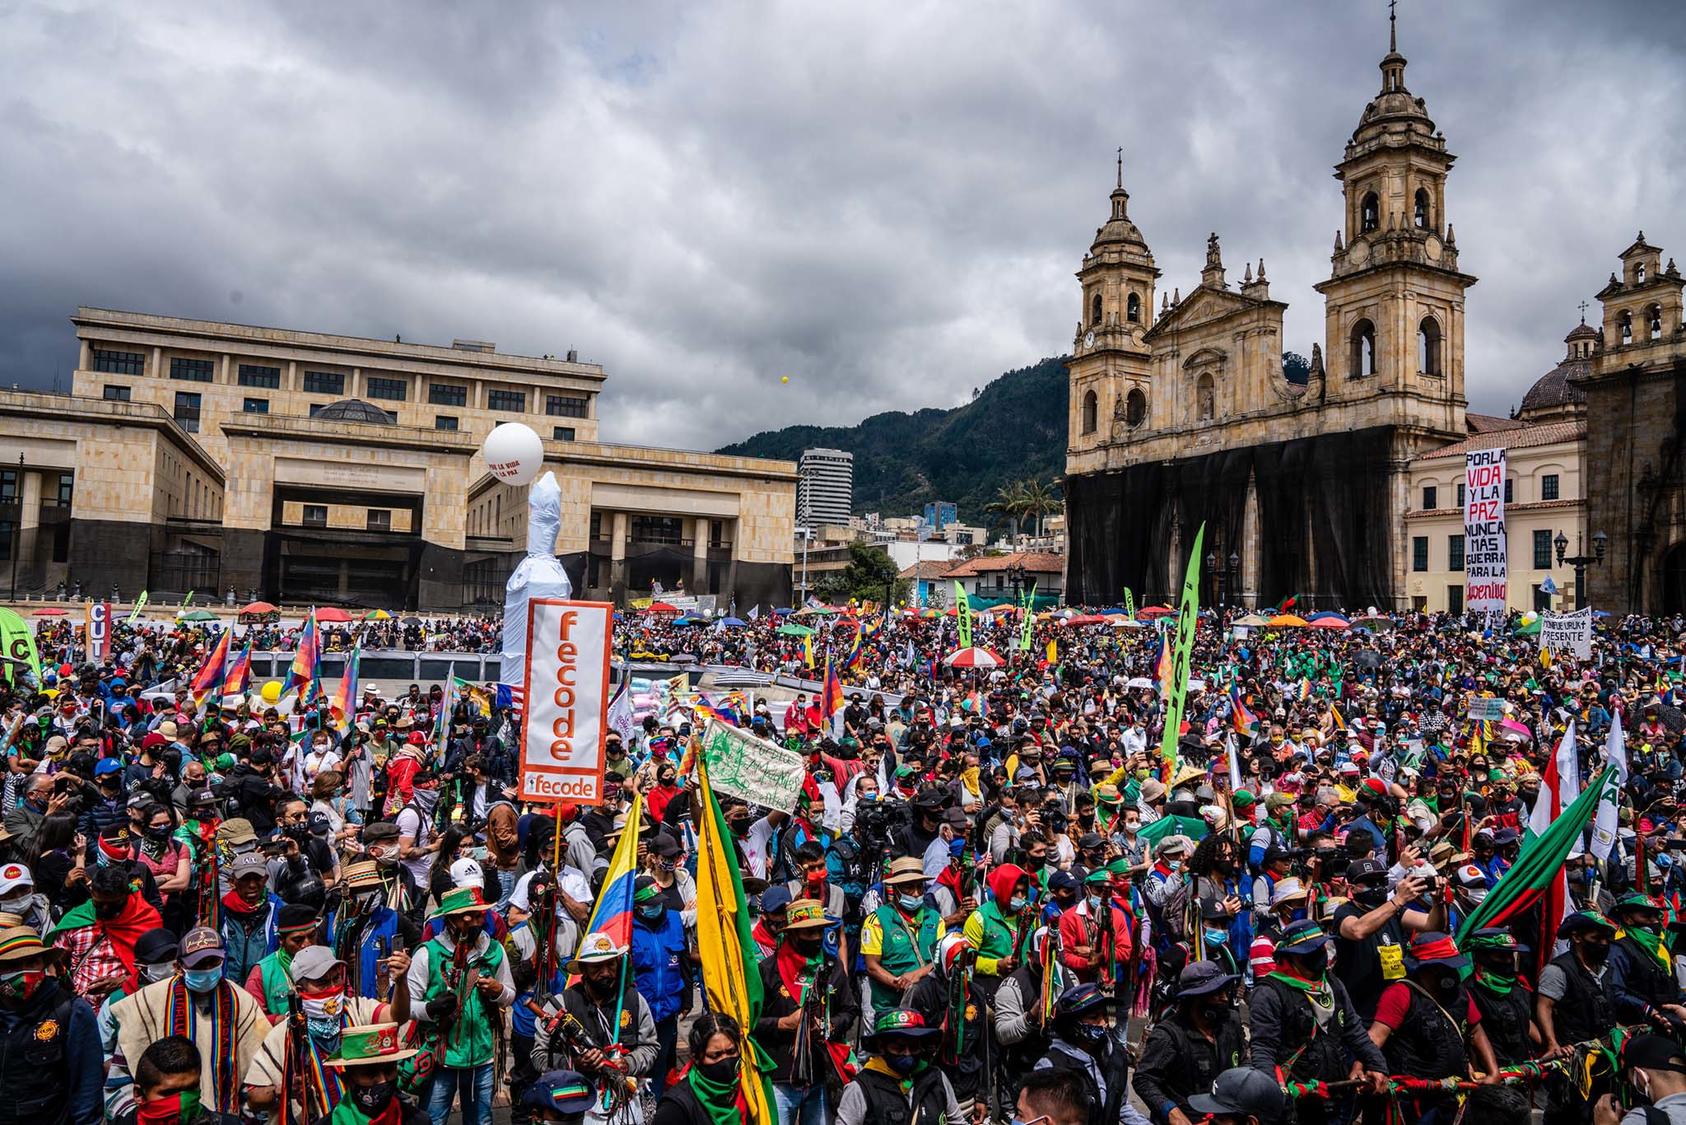 Indigenous Colombians protest in Bogotá in 2020 against mass killings of their people by drug cartels and armed groups controlling rural areas. Nonviolent protest surged worldwide last year, a trend likely to continue. (Federico Rios/The New York Times) 